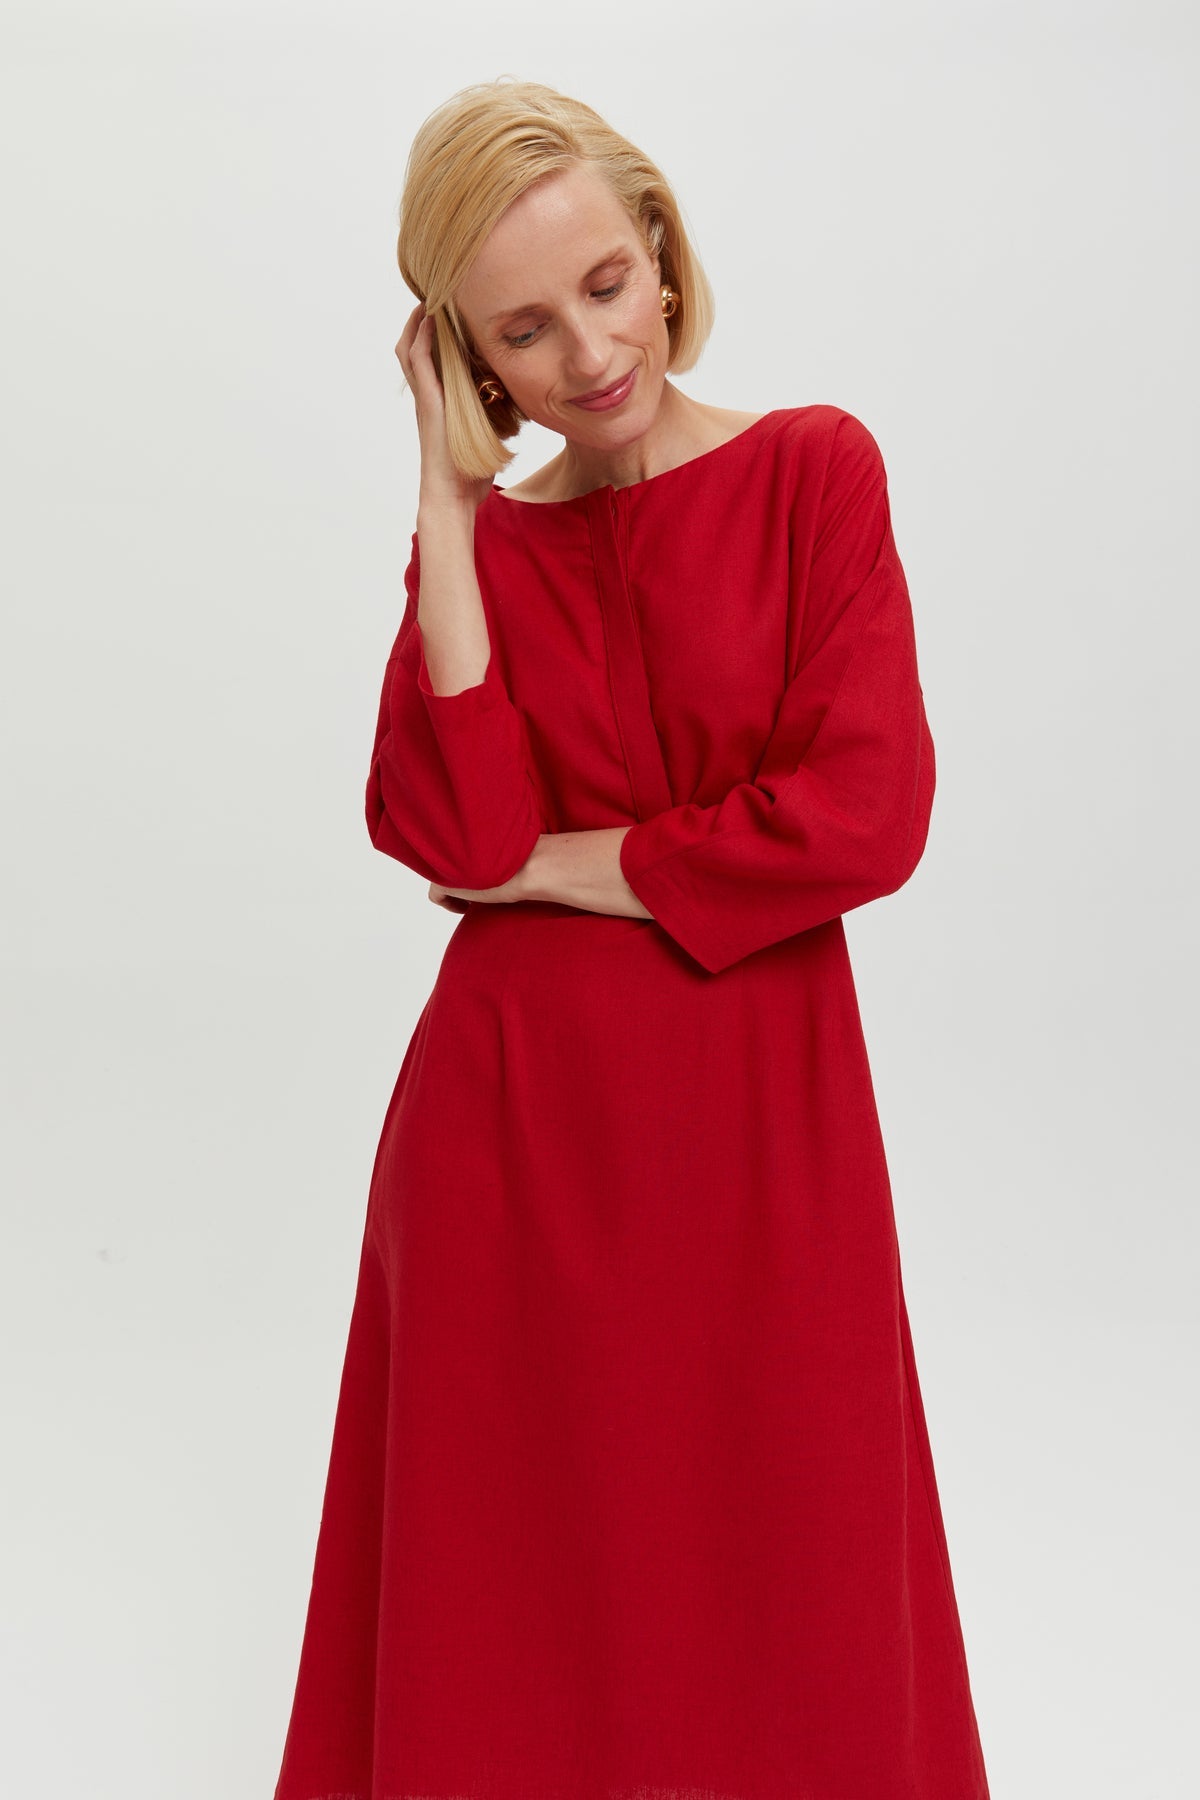 Lusin | Linen button front midi dress in red by Ayani